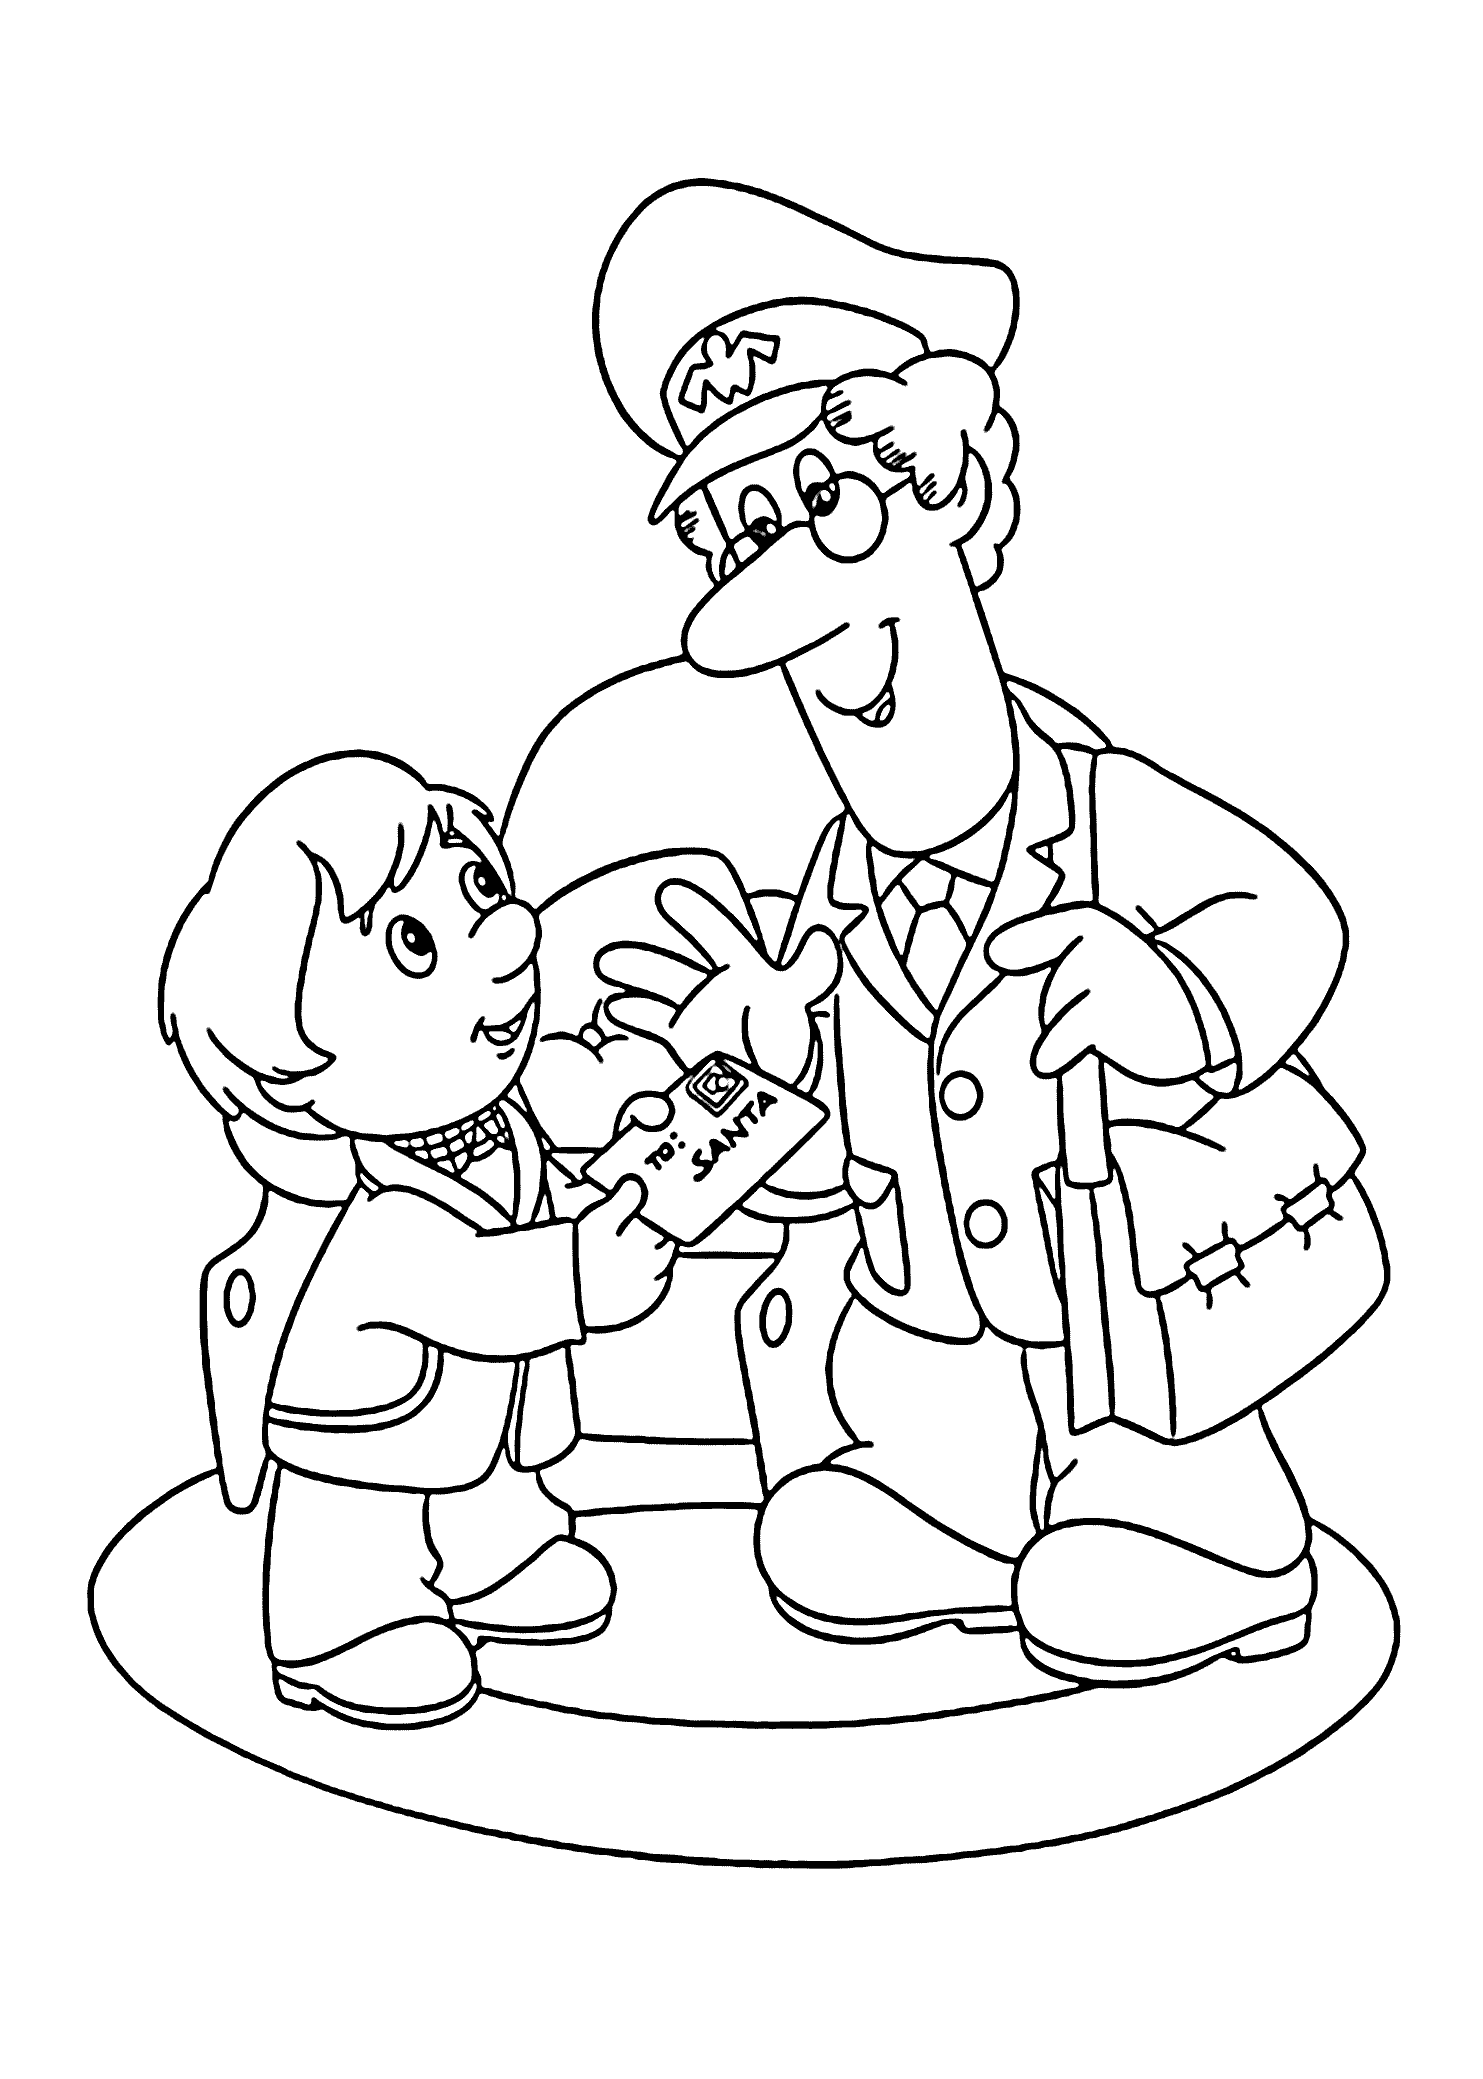 Postman Pat And Letter To Santa Coloring Pages For Kids Printable Free Santa Coloring